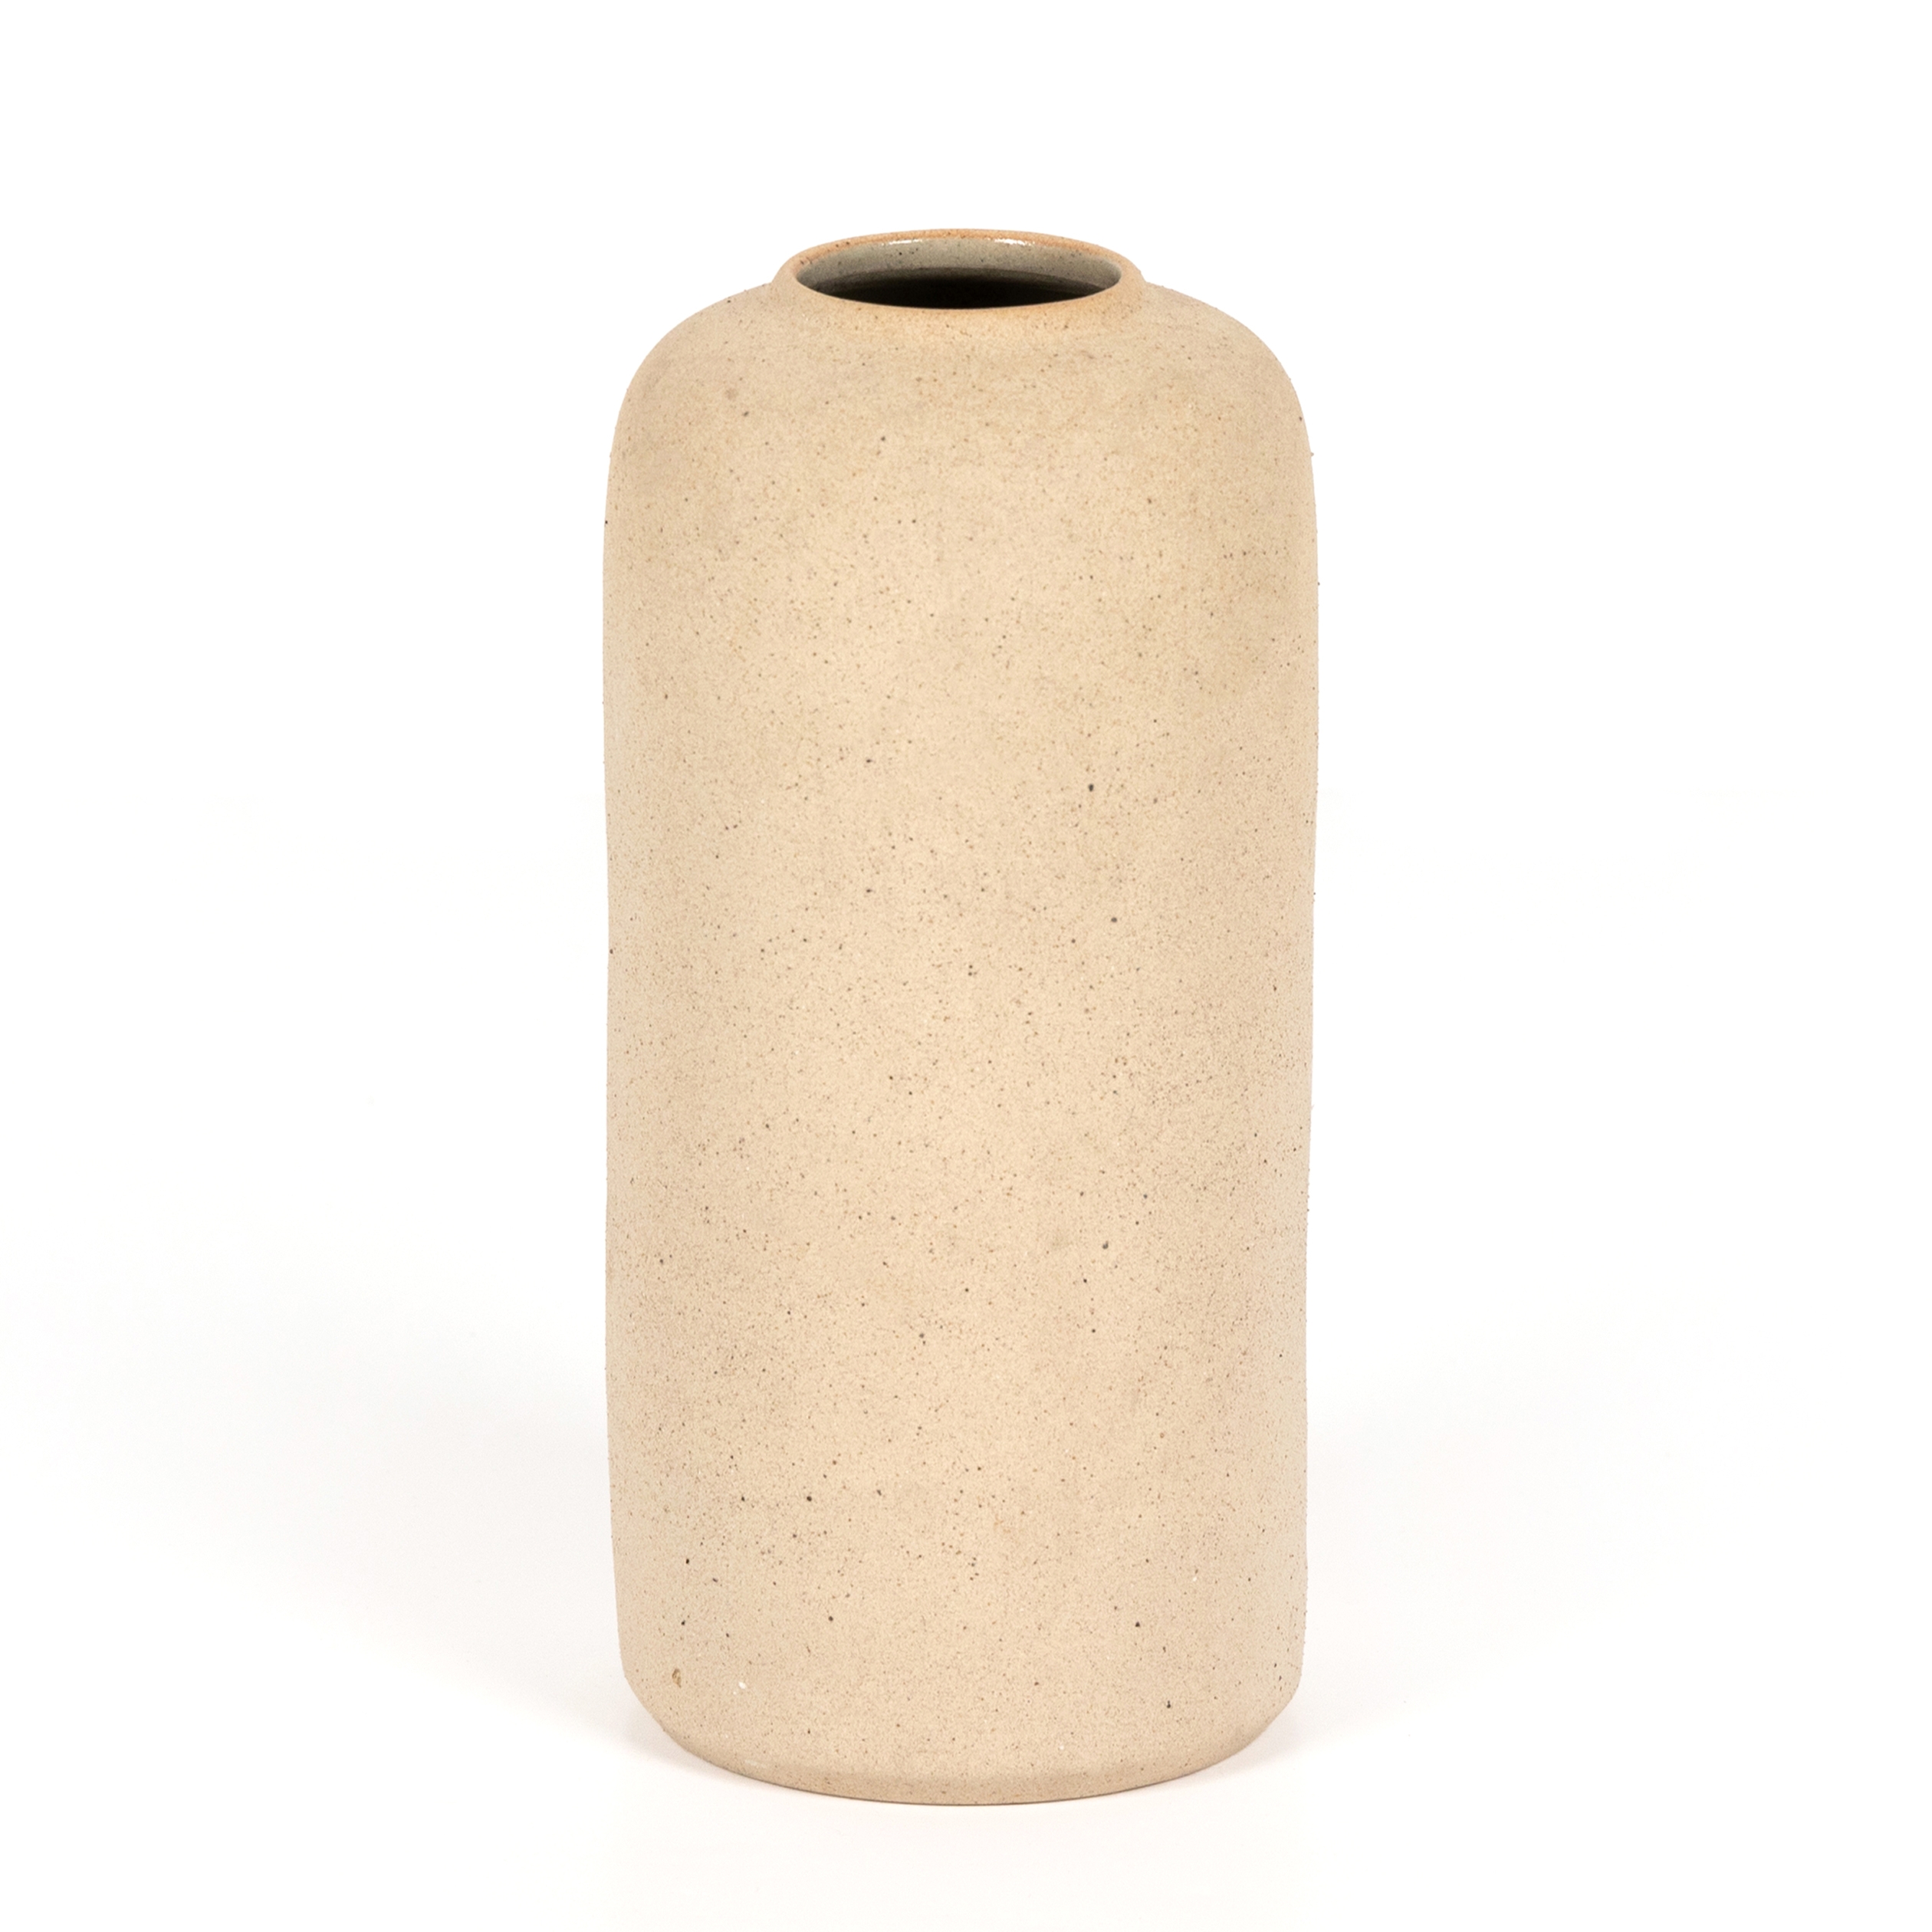 Evalia Tall Vase-Natural Speckled Clay - Image 0